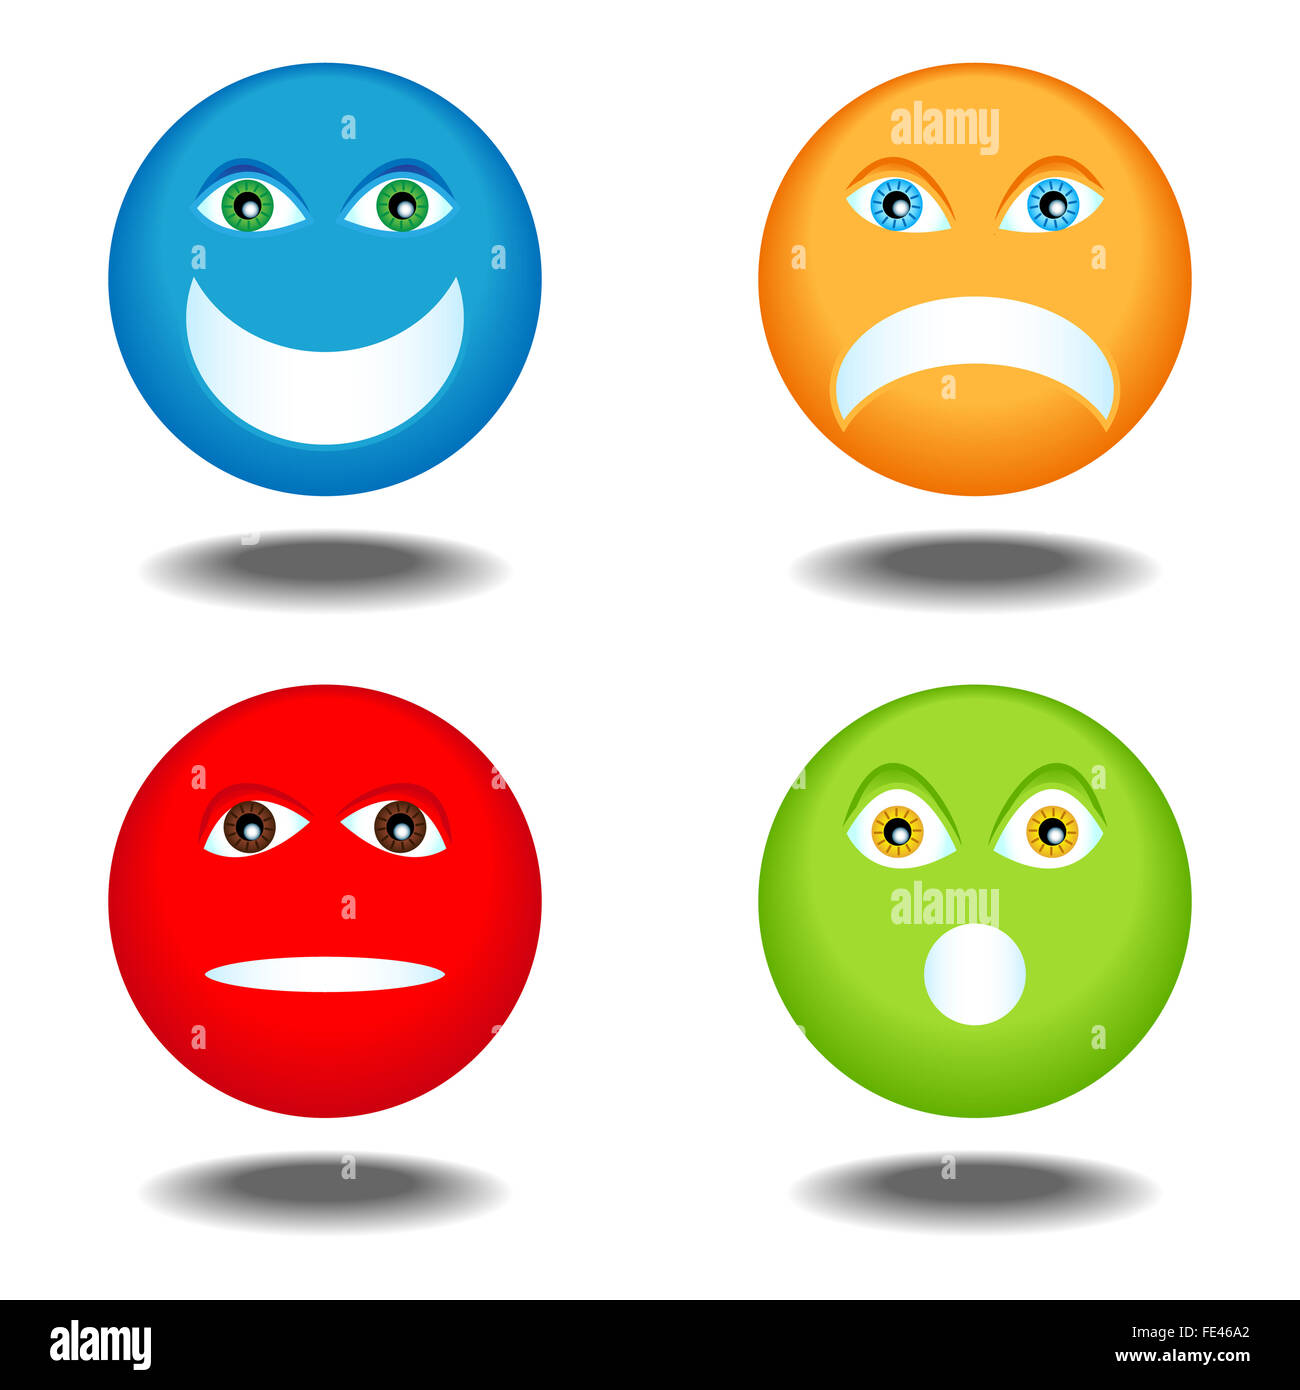 Funny emotional face icons in different colors Stock Photo